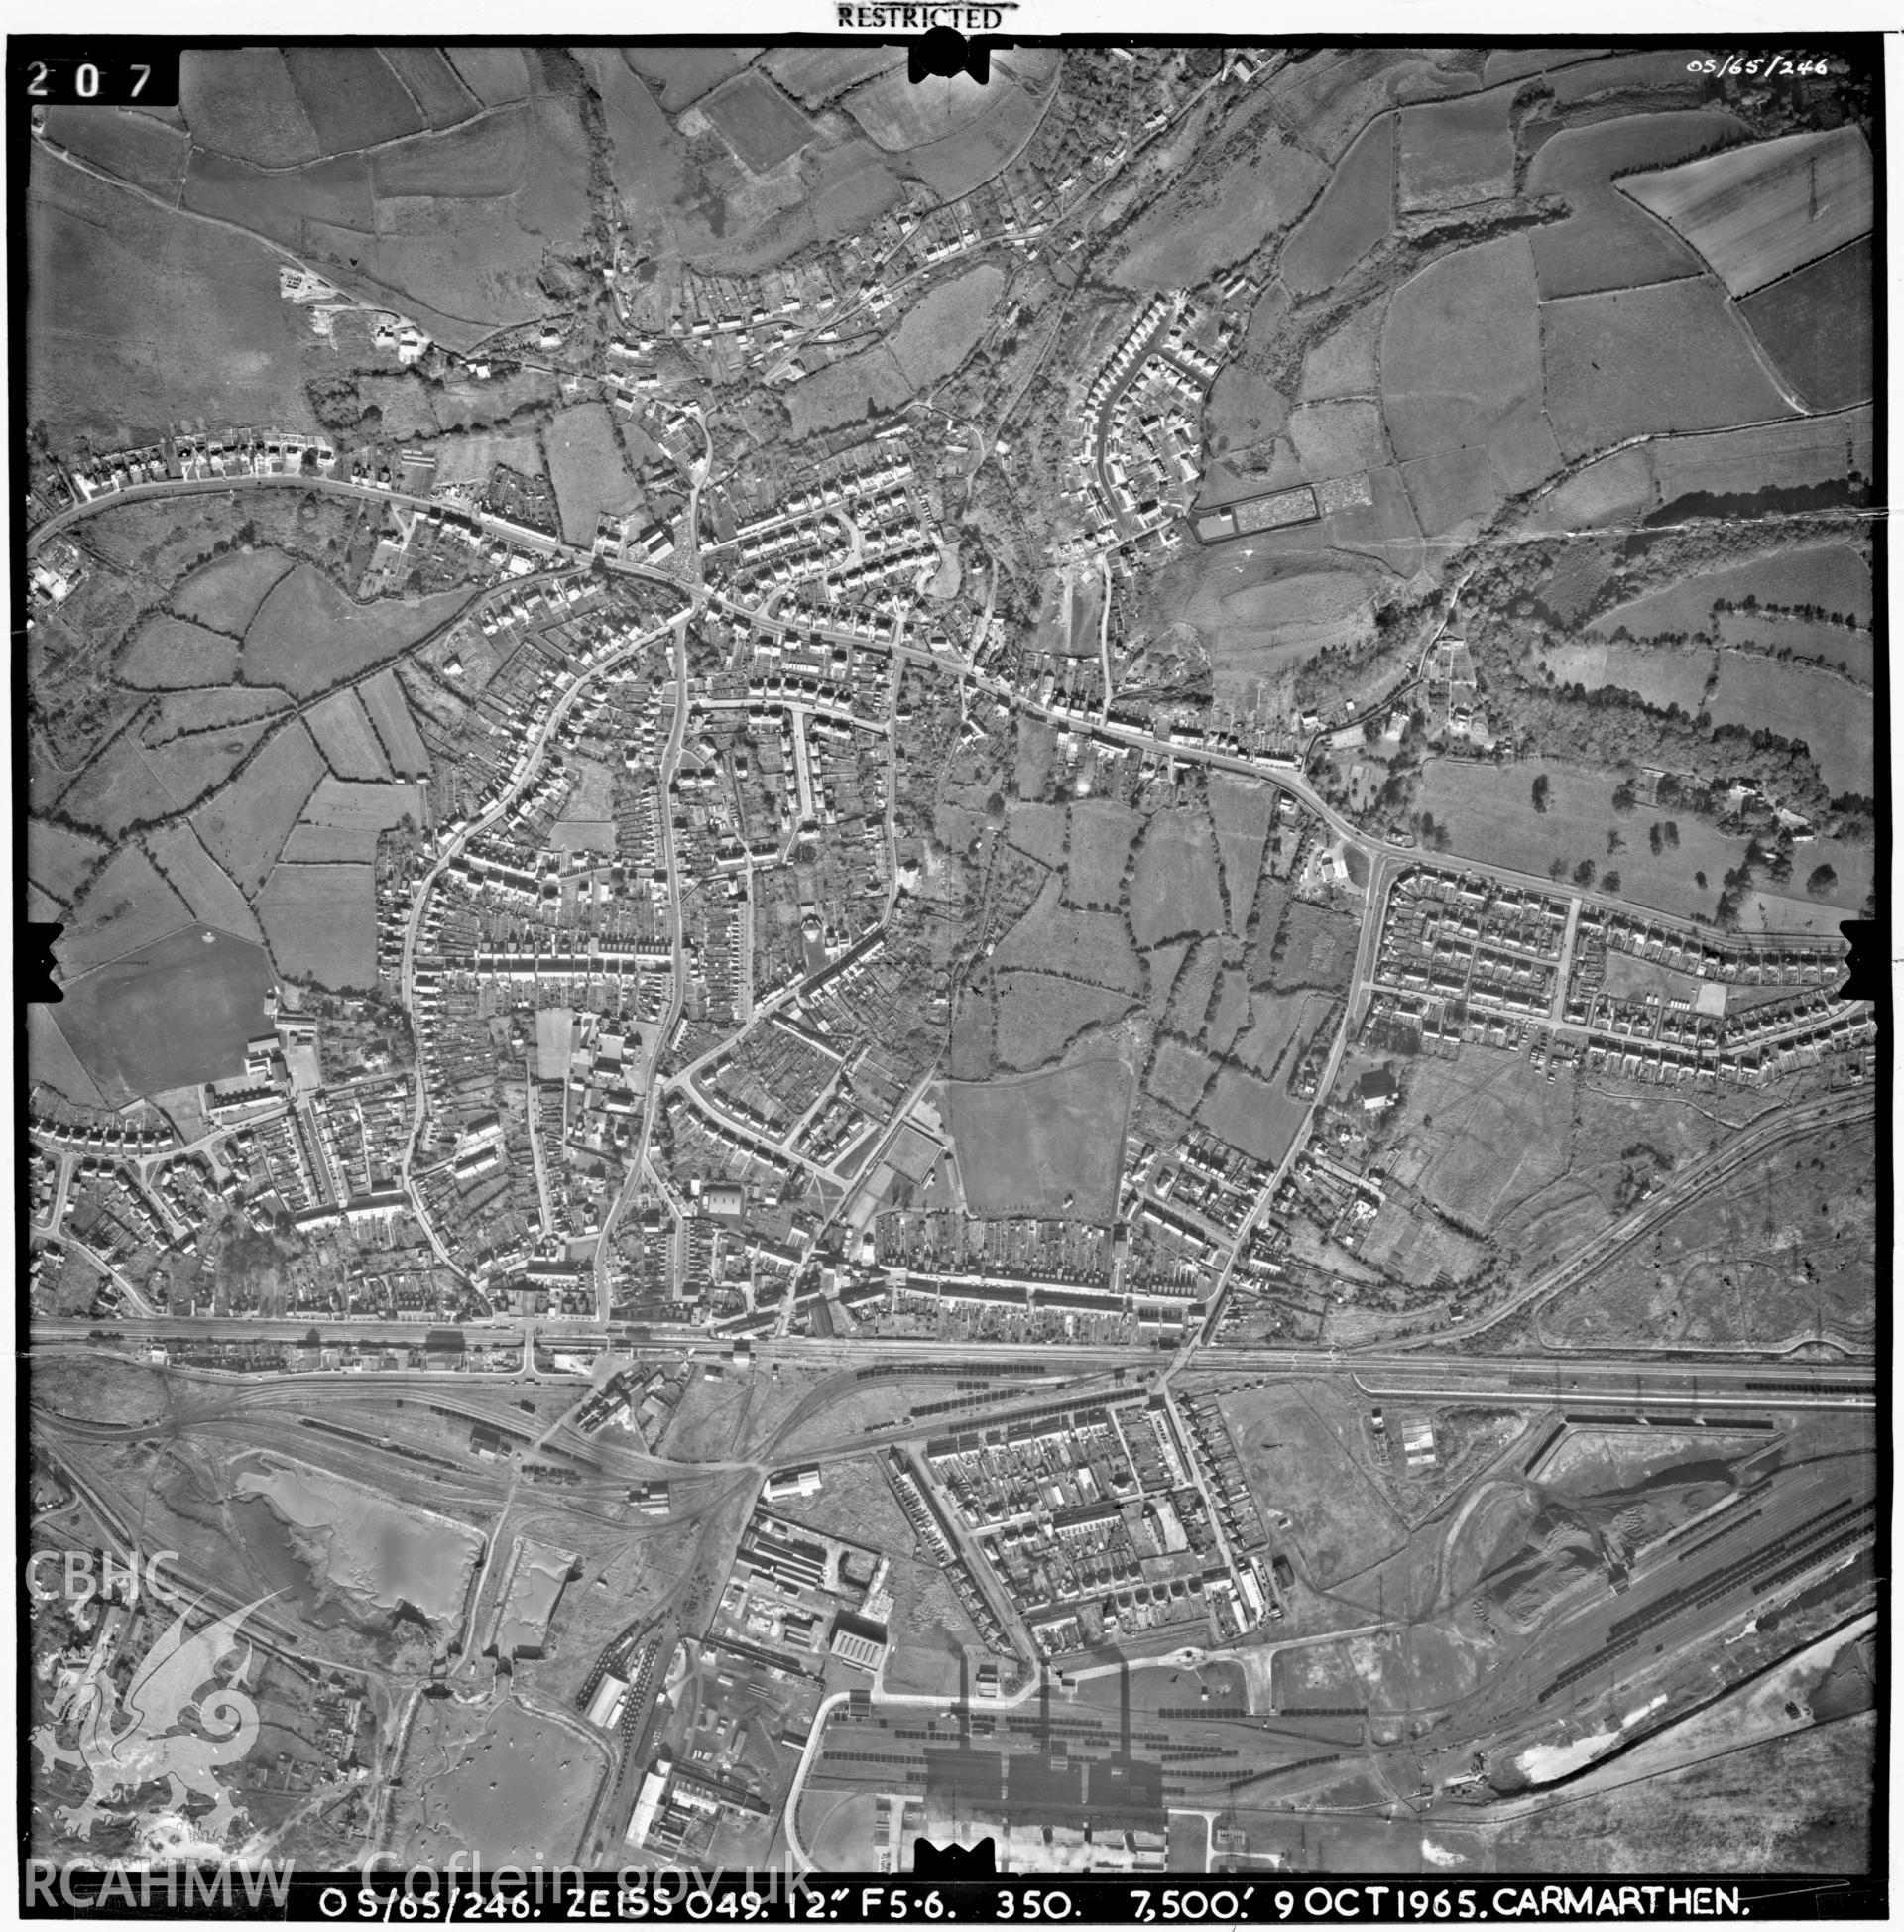 Digitized copy of an aerial photograph showing Burry Port area, taken by Ordnance Survey, 1965